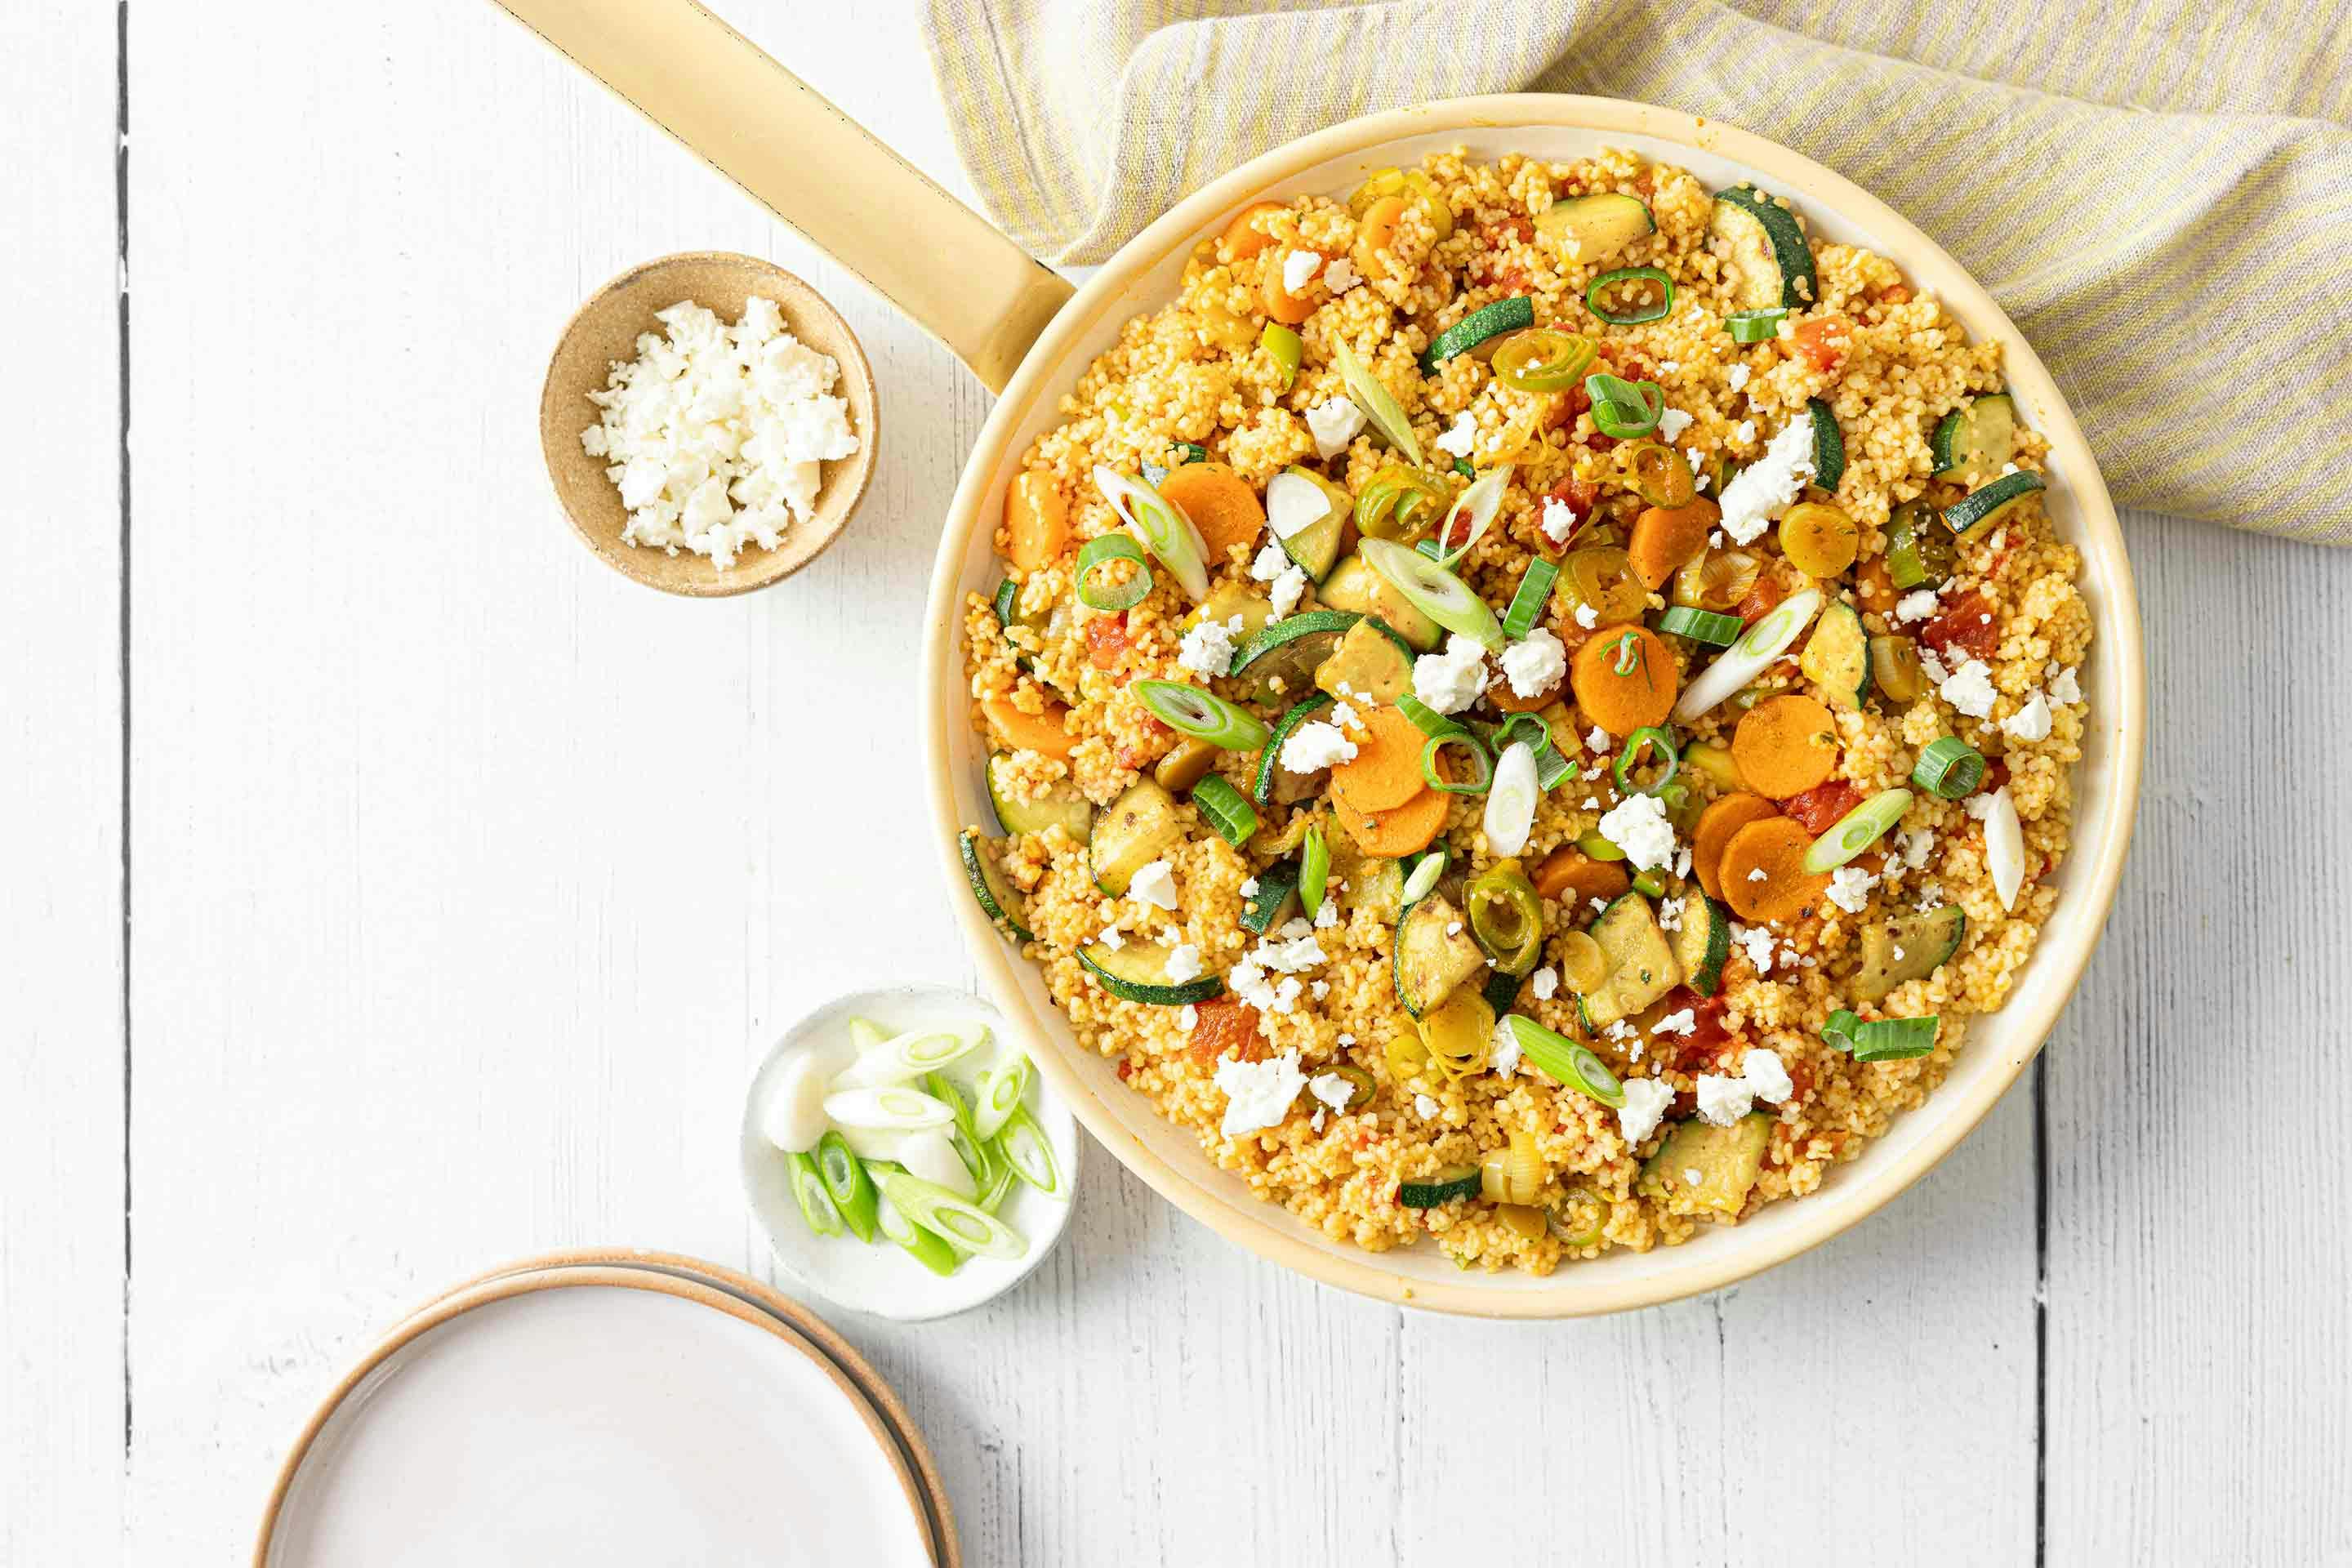 A delicious vegetarian bowl with couscous and mixed vegetables.